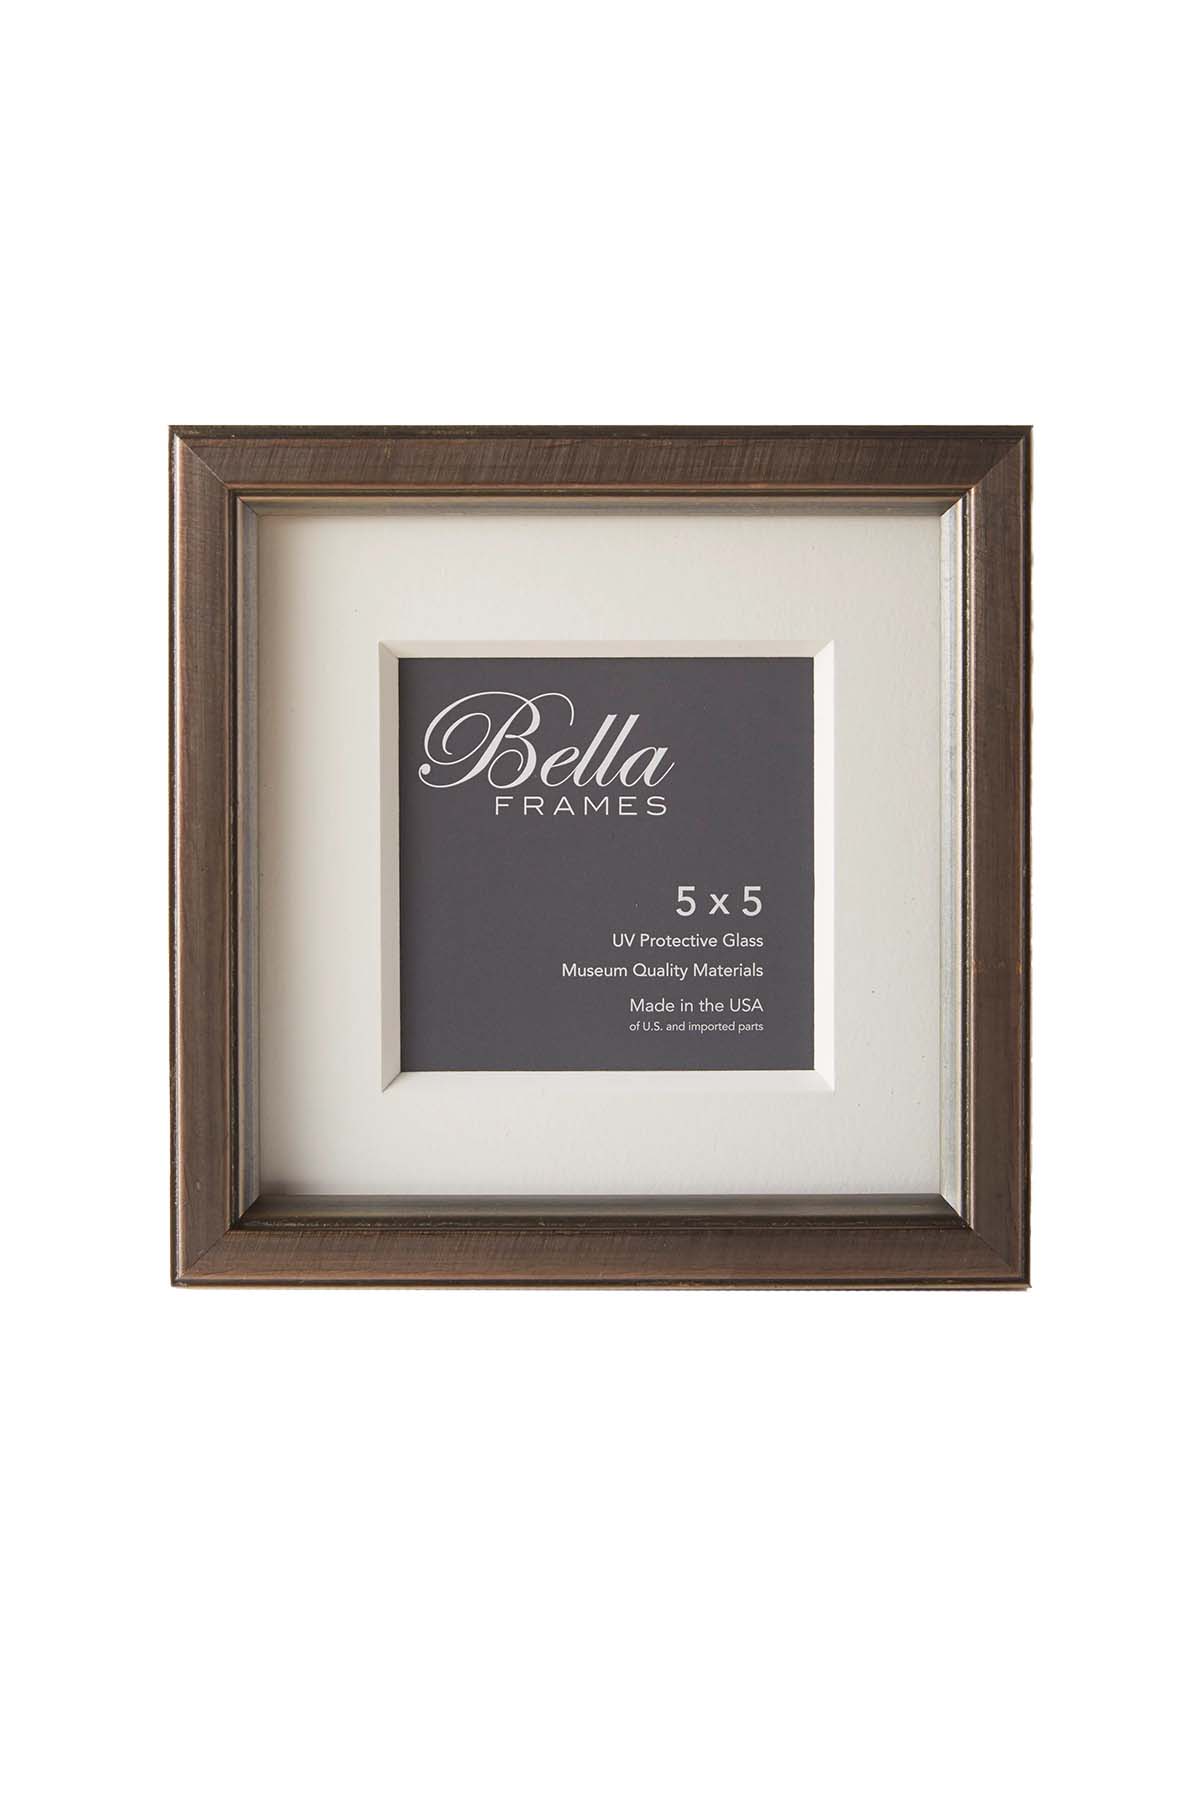 Brancui Piombo 5x5 pewter-colored frame - Front view